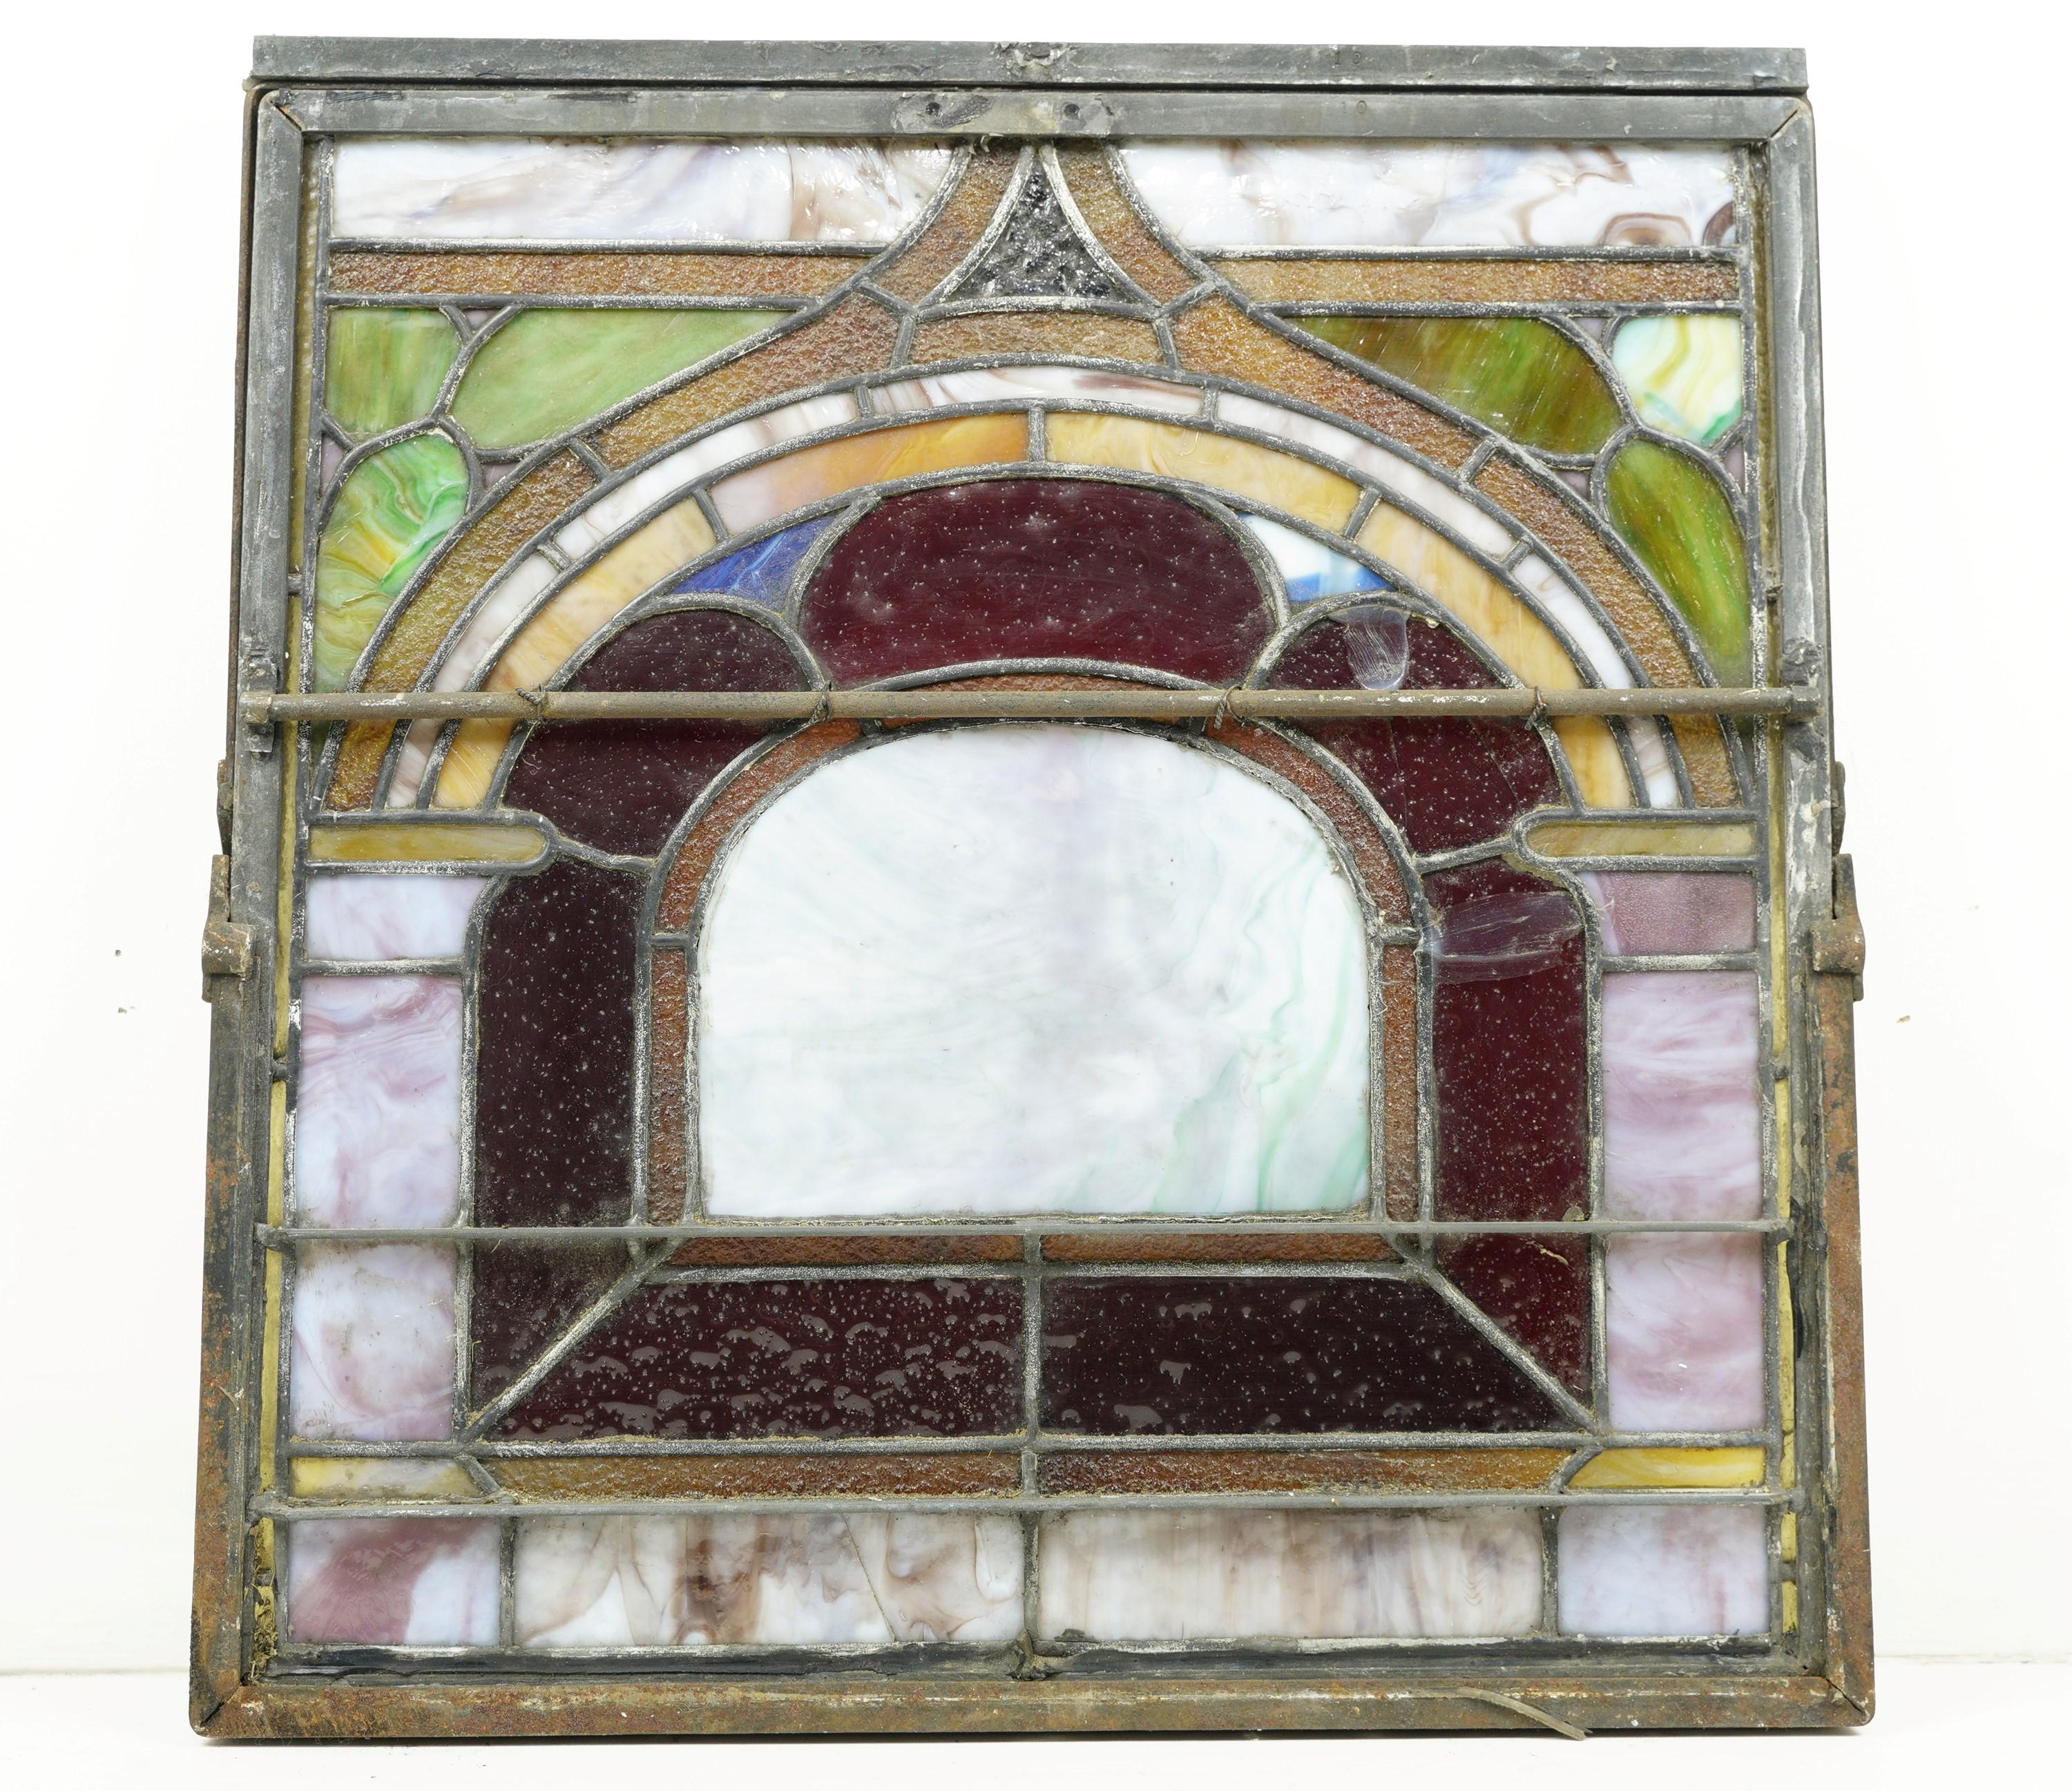 Rescued 2 Foot Square Arched Stained Glass Window 6